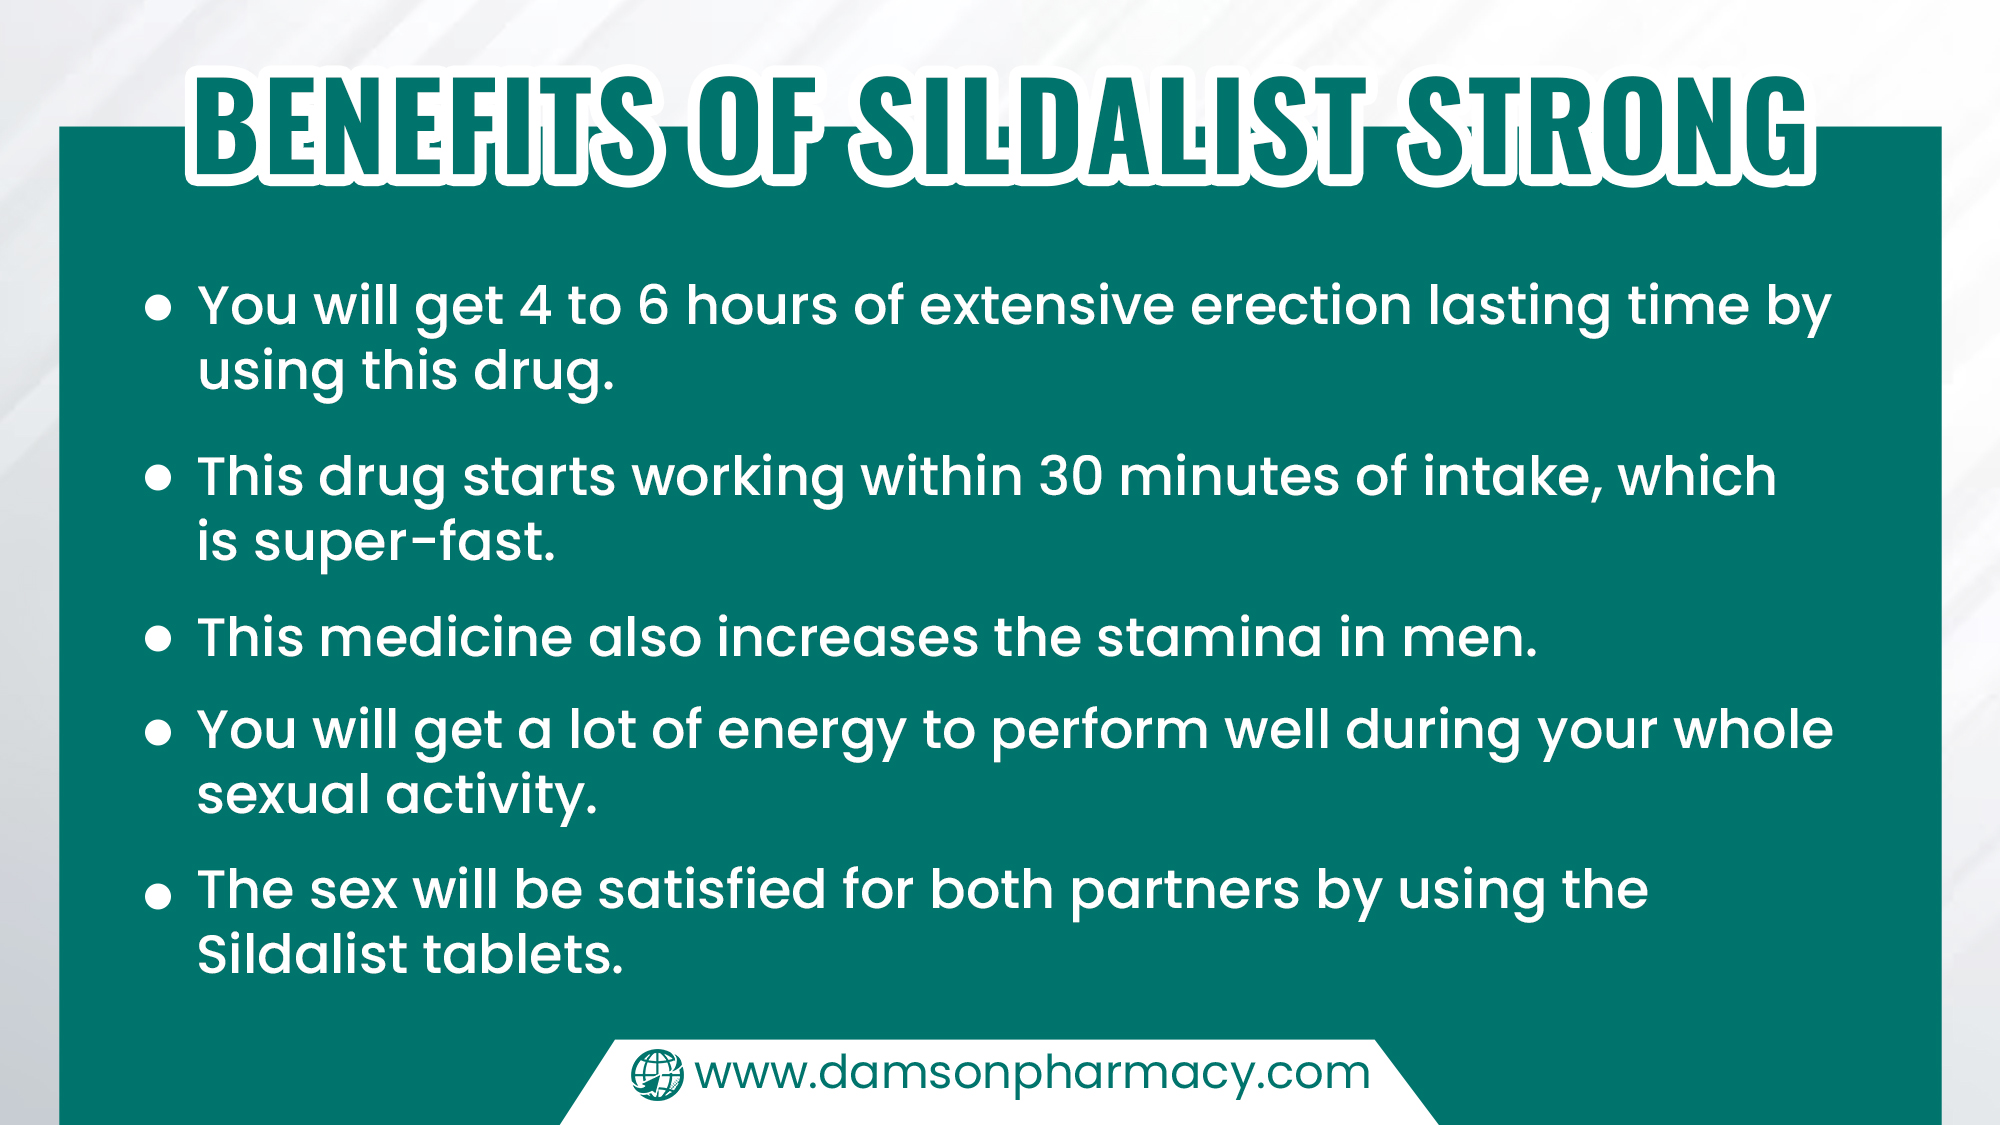 Benefits of Sildalist Strong